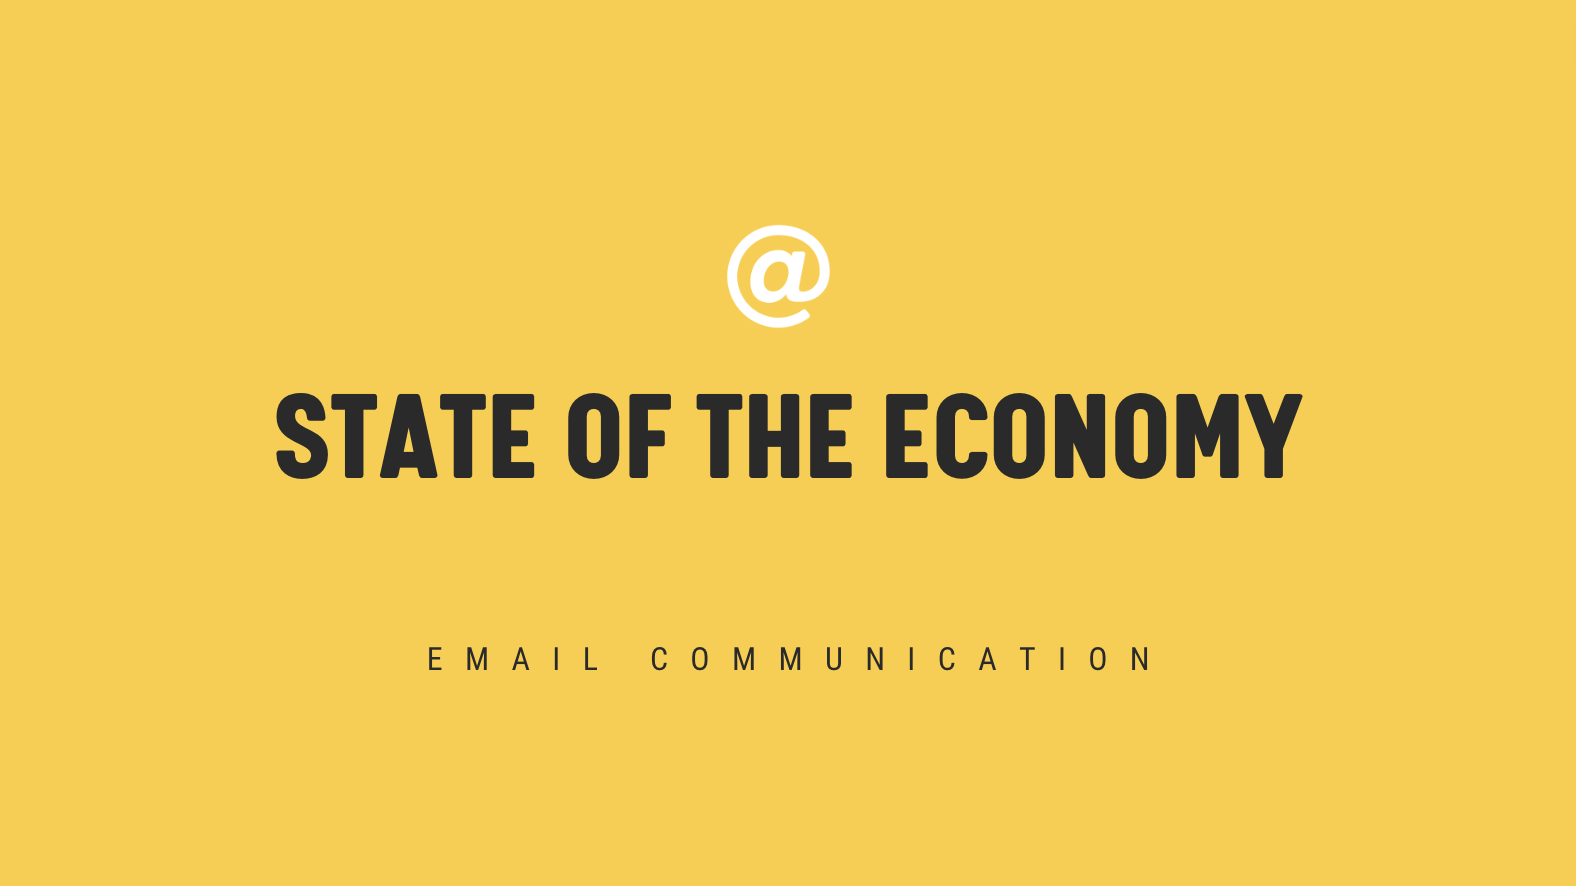 [NEW] State of the Economy - Timely Email